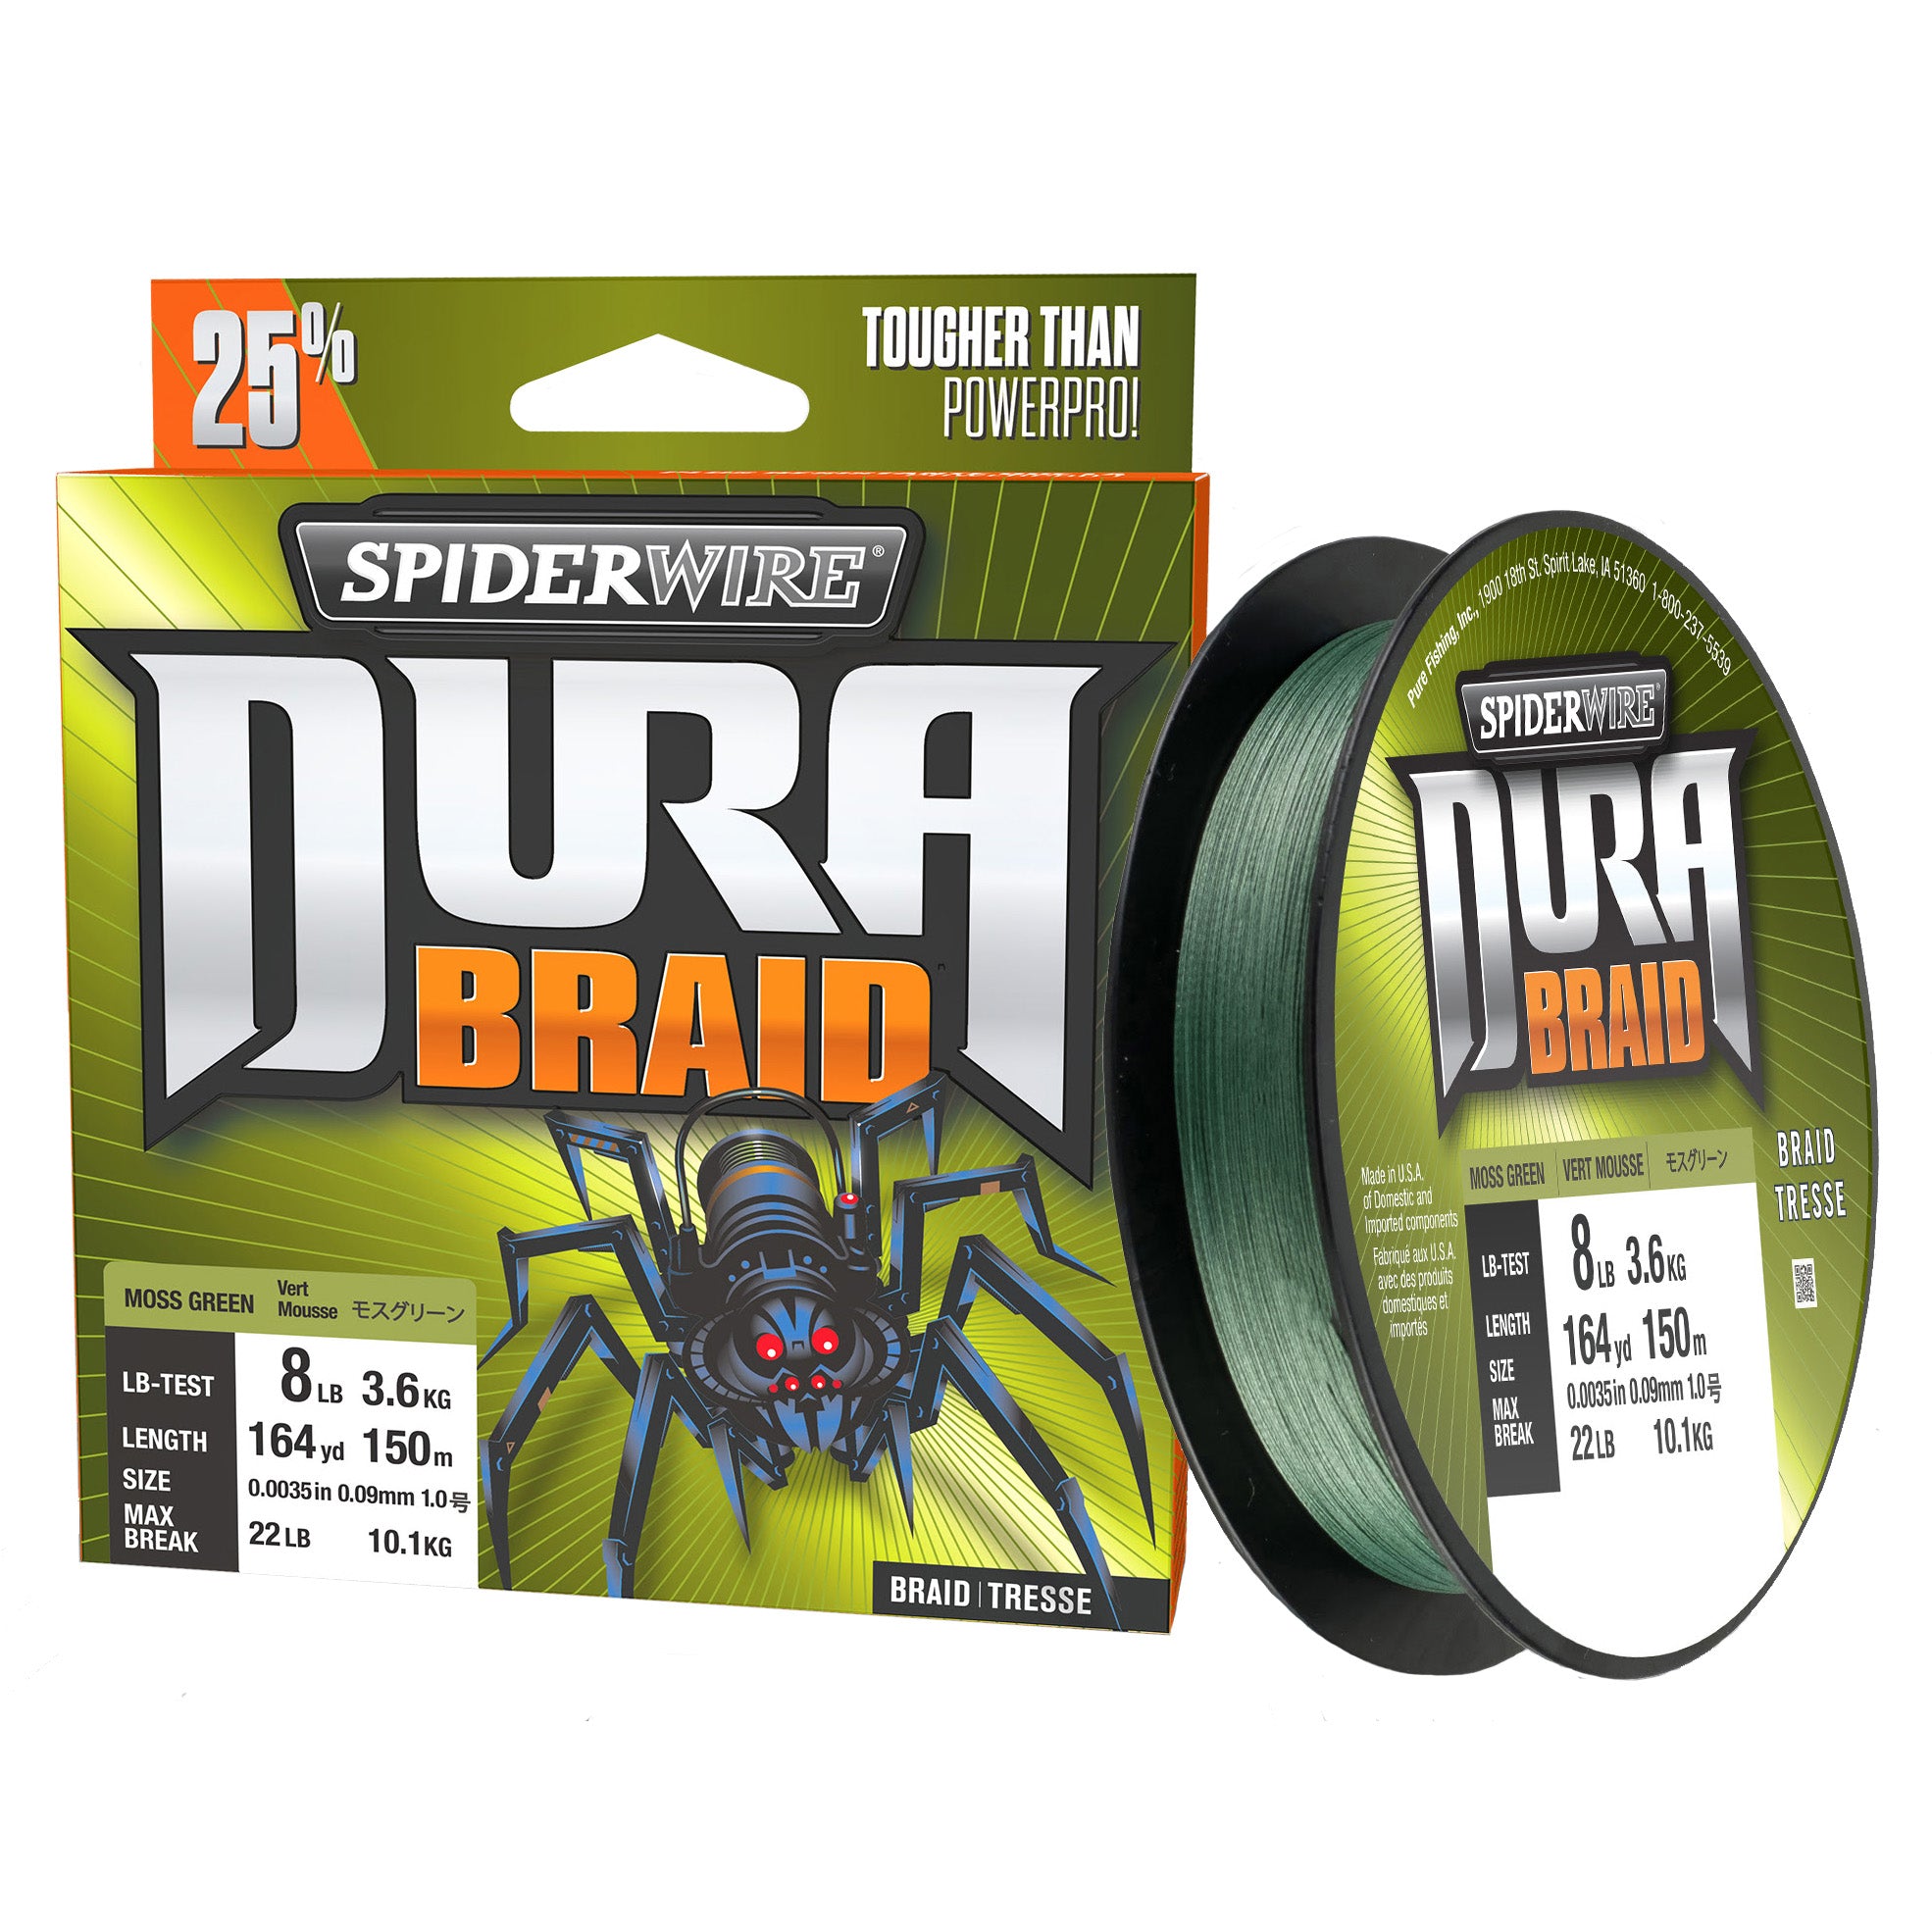 SpiderWire Ultracast Braided Fishing Line – 30 lbs./164 yd